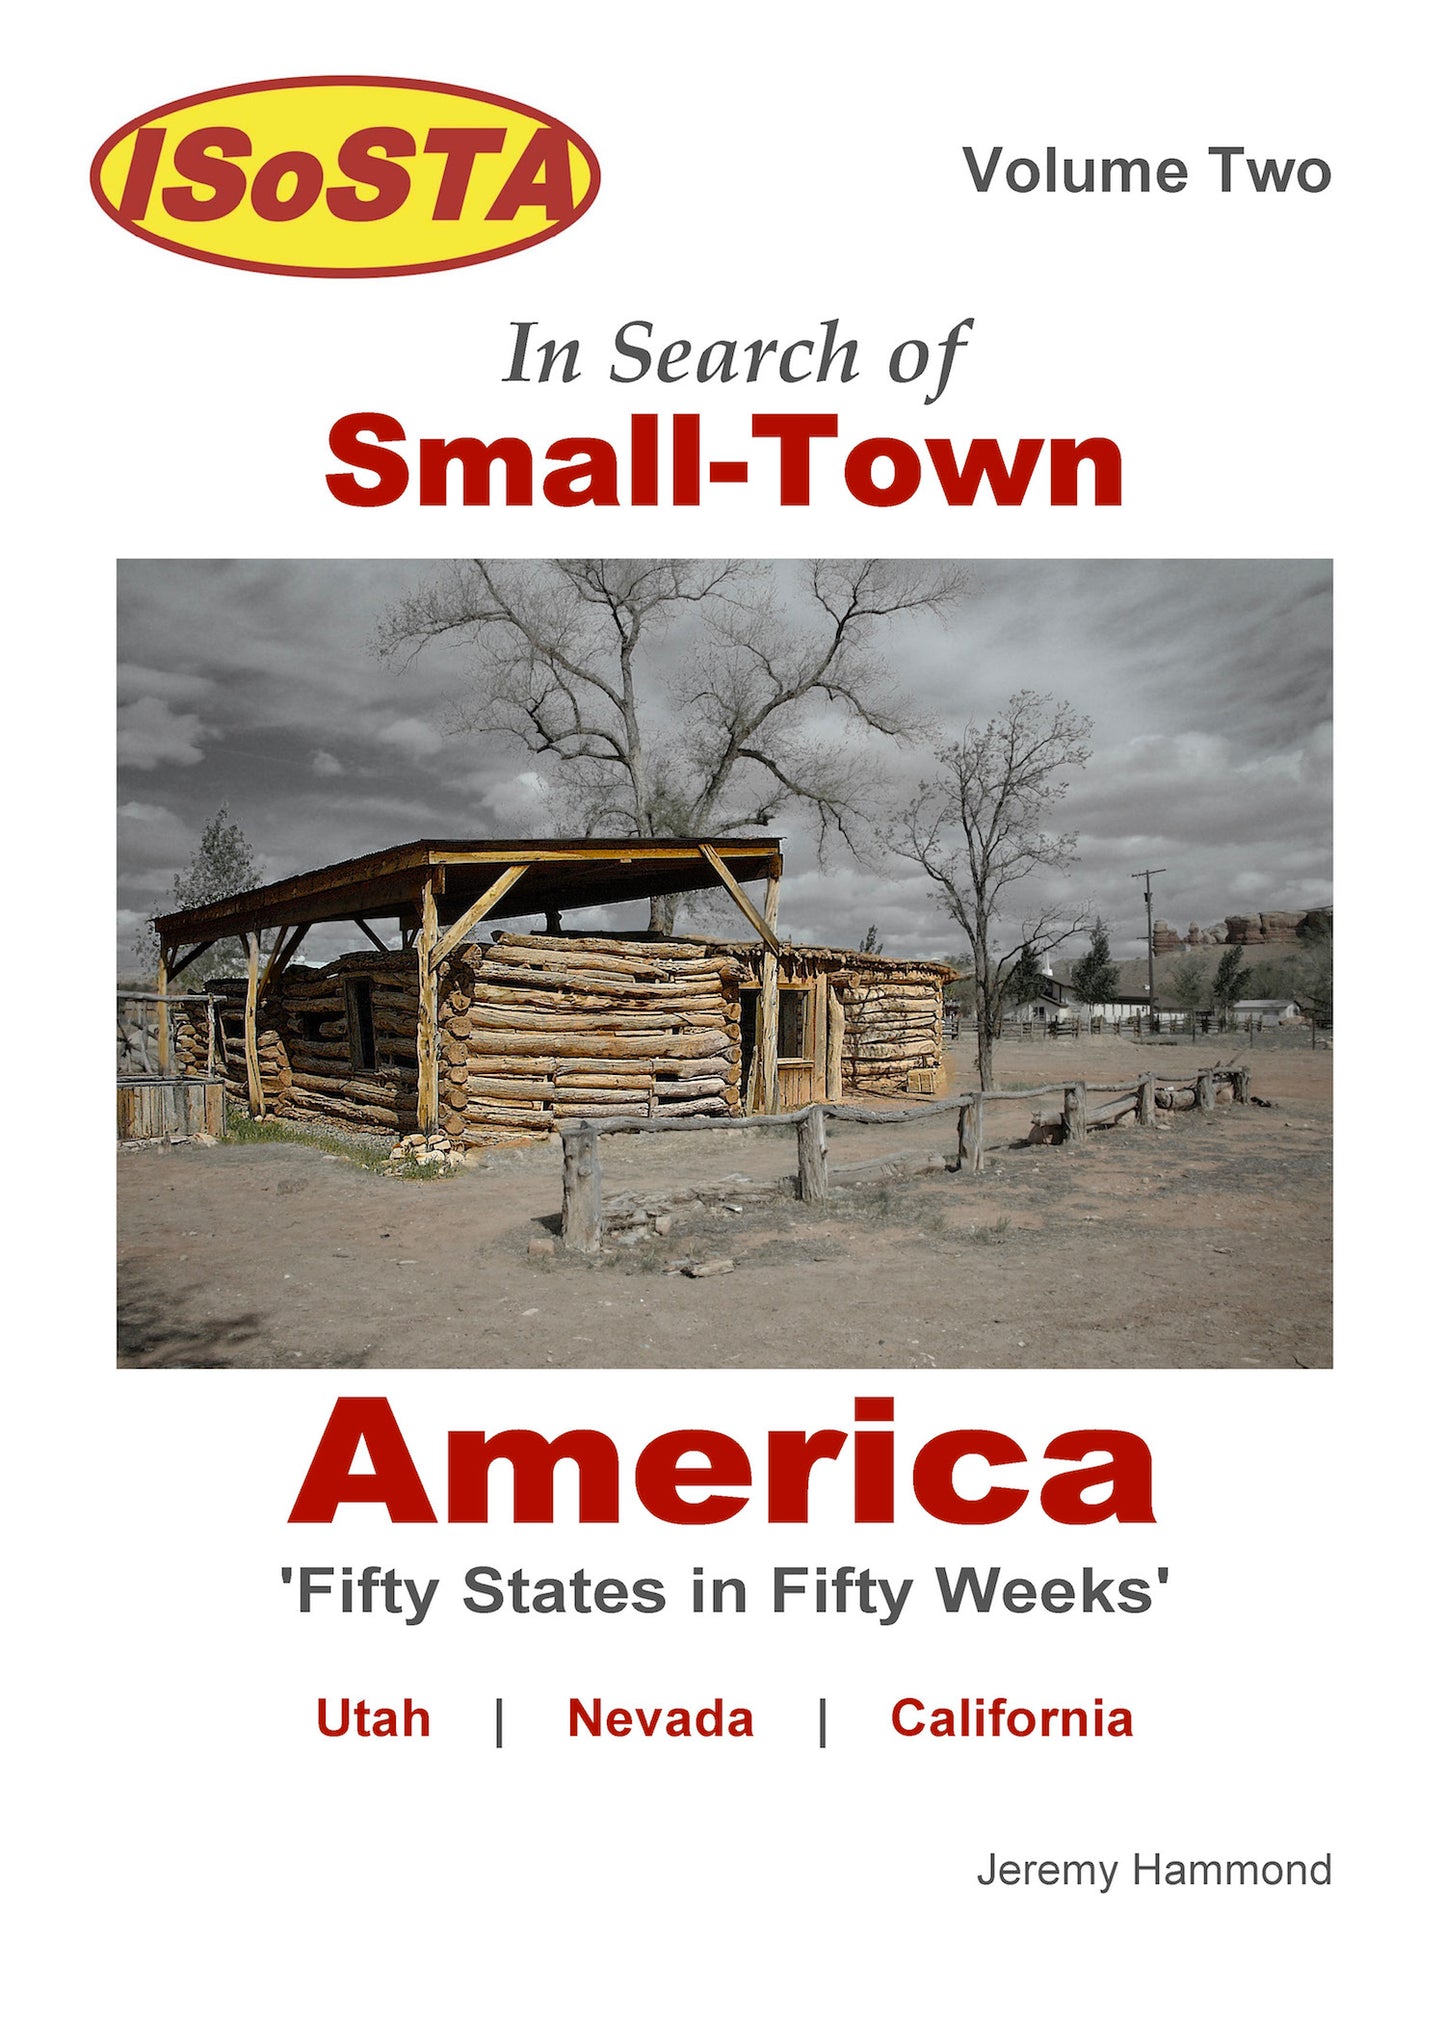 In Search of Small-Town America: Volume 2